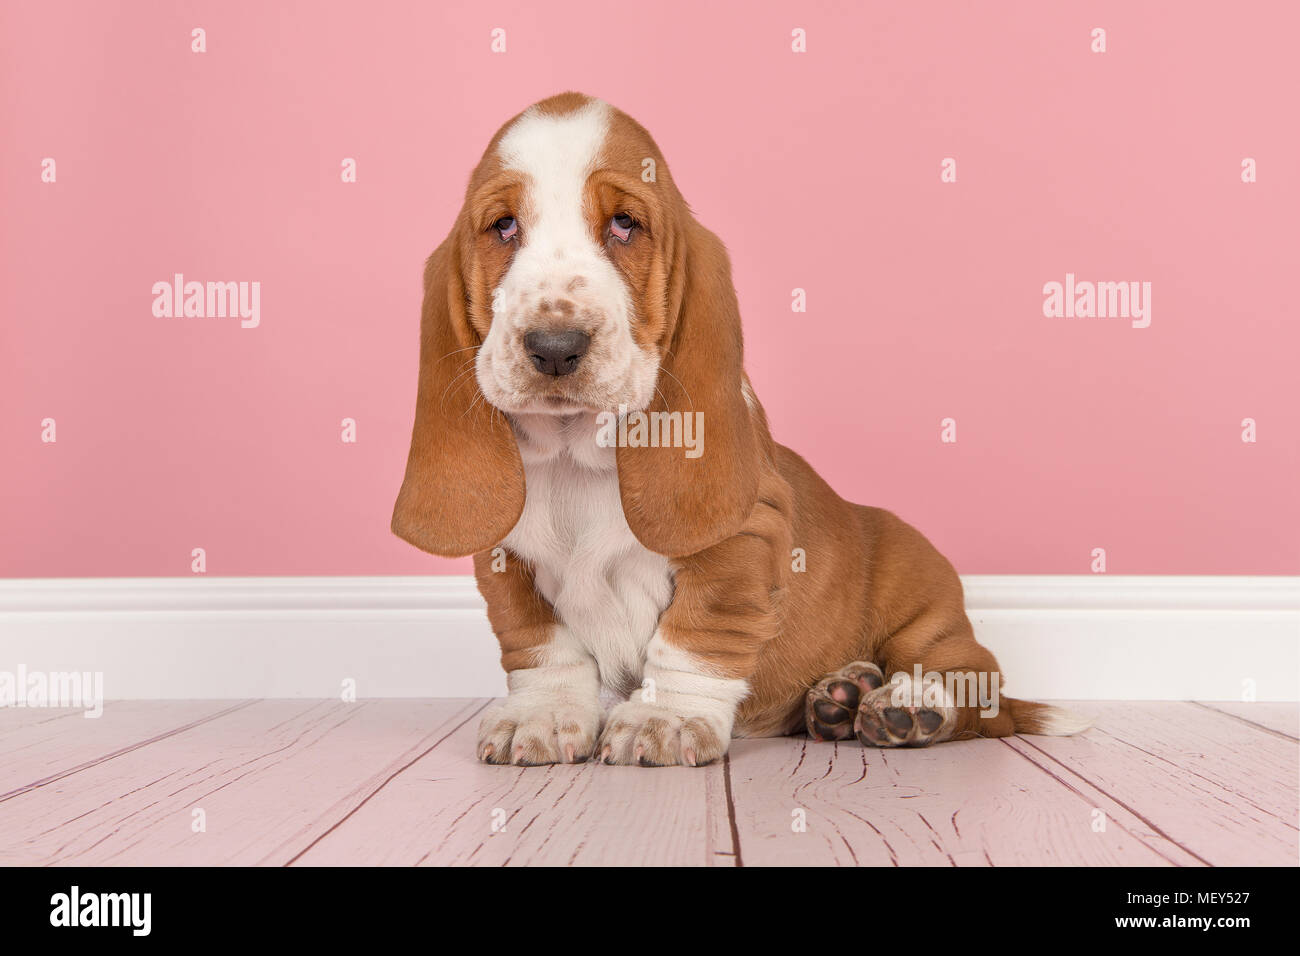 Solformørkelse væv klynke Cute red and white basset hound puppy sitting in a pink living room setting  Stock Photo - Alamy